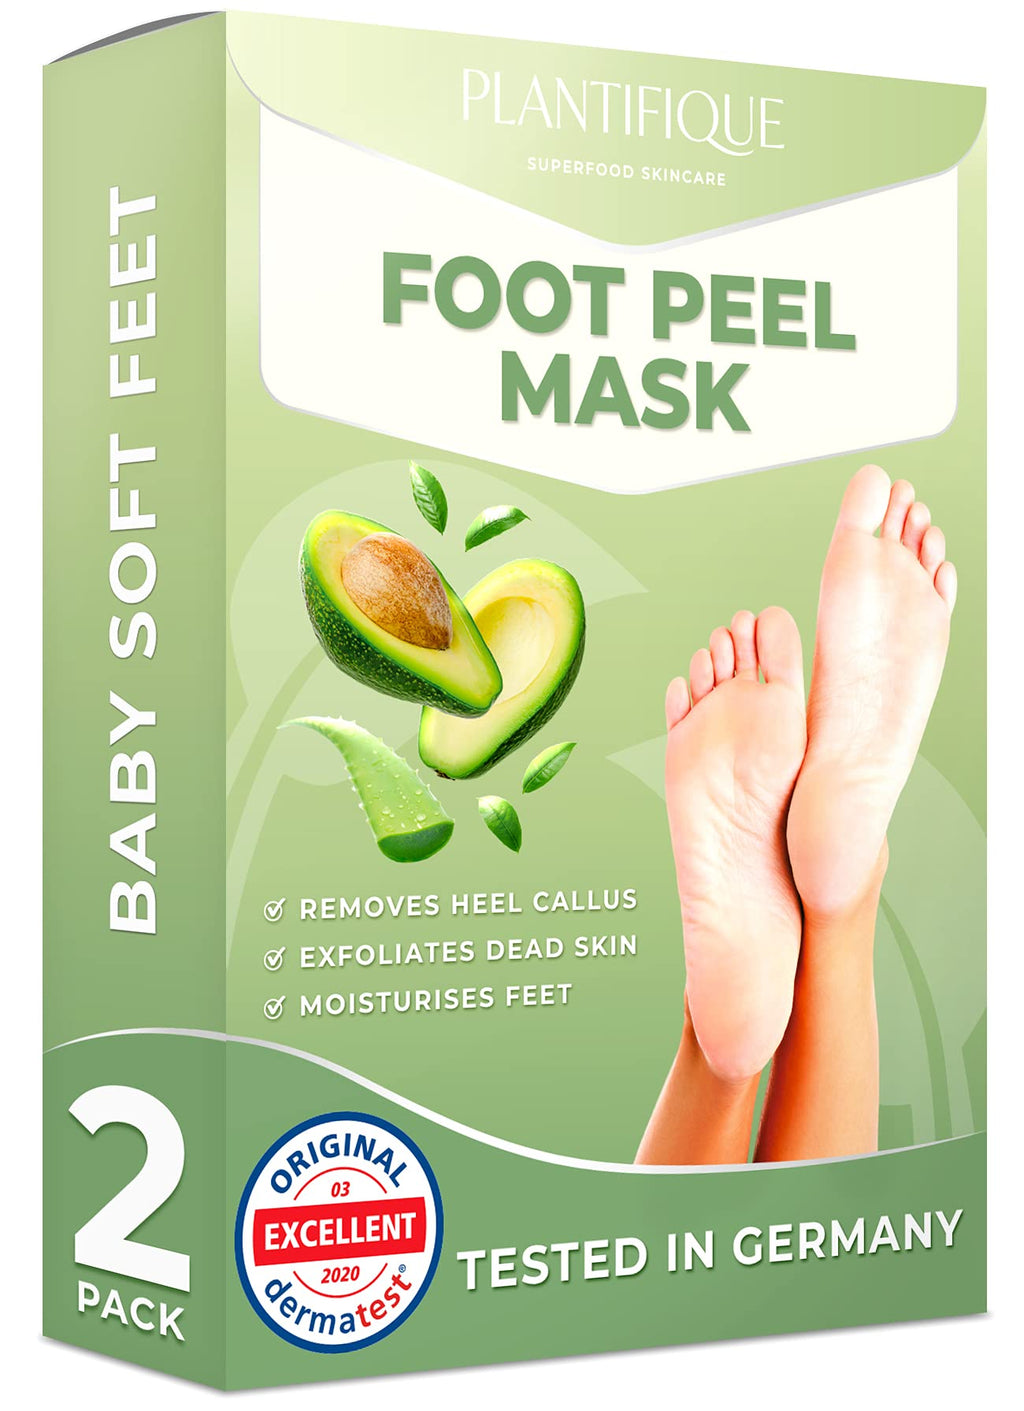 [Australia] - Foot Peel Mask - Avocado Feet Peeling Mask 2 Pack - Dermatologically Tested, Cracked Heel Repair, Dead Skin Remover for Baby Soft Feet - Exfoliating Peel Natural Treatment by Plantifique 